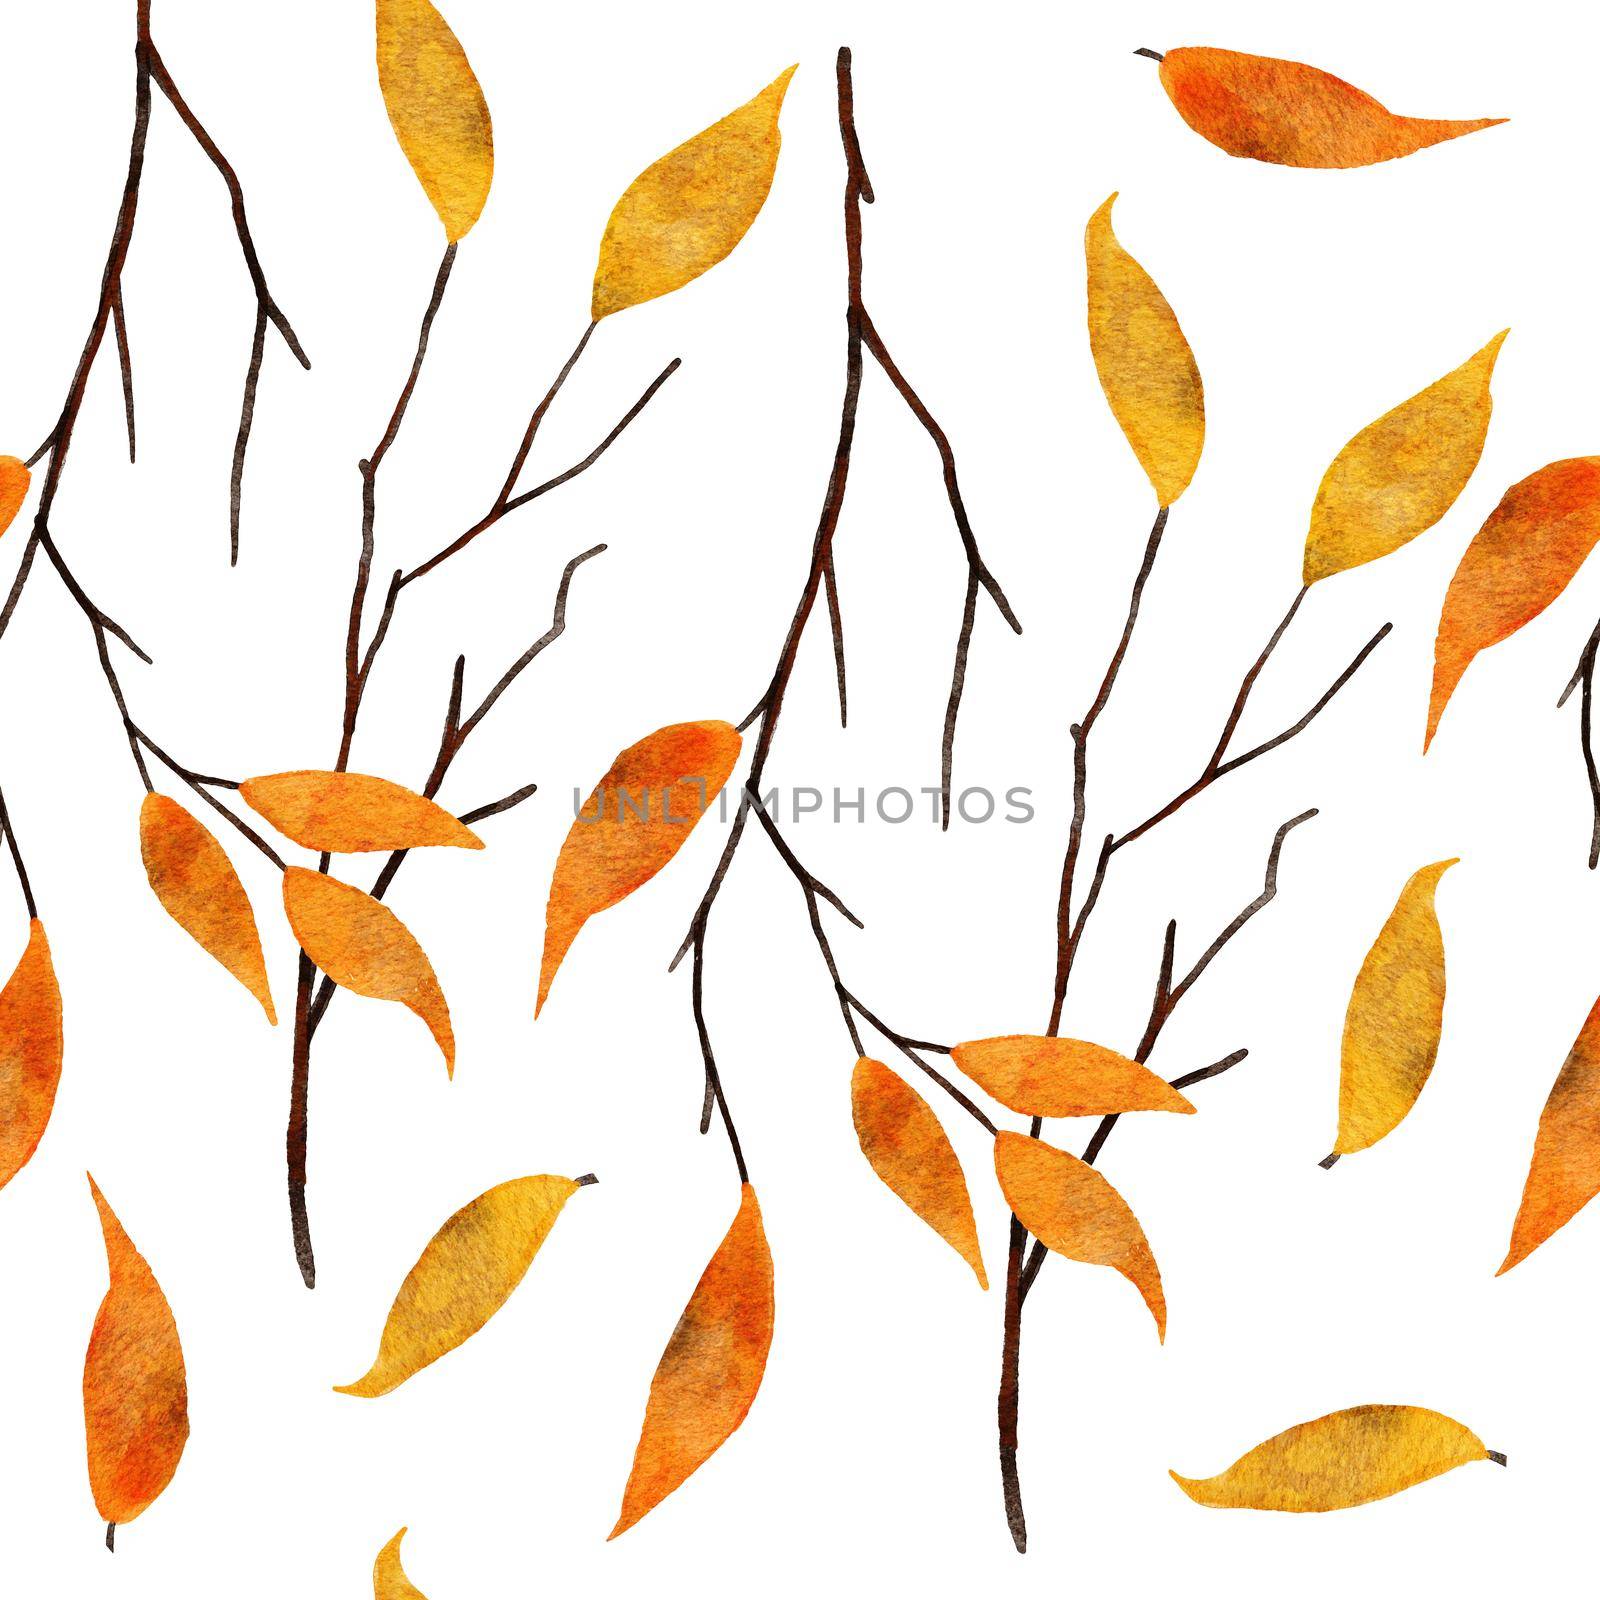 Seamless watercolor hand drawn pattern with yellow orange leaves thin tree branches. Fall autumn september october background. Elegant fabric print on white . by Lagmar